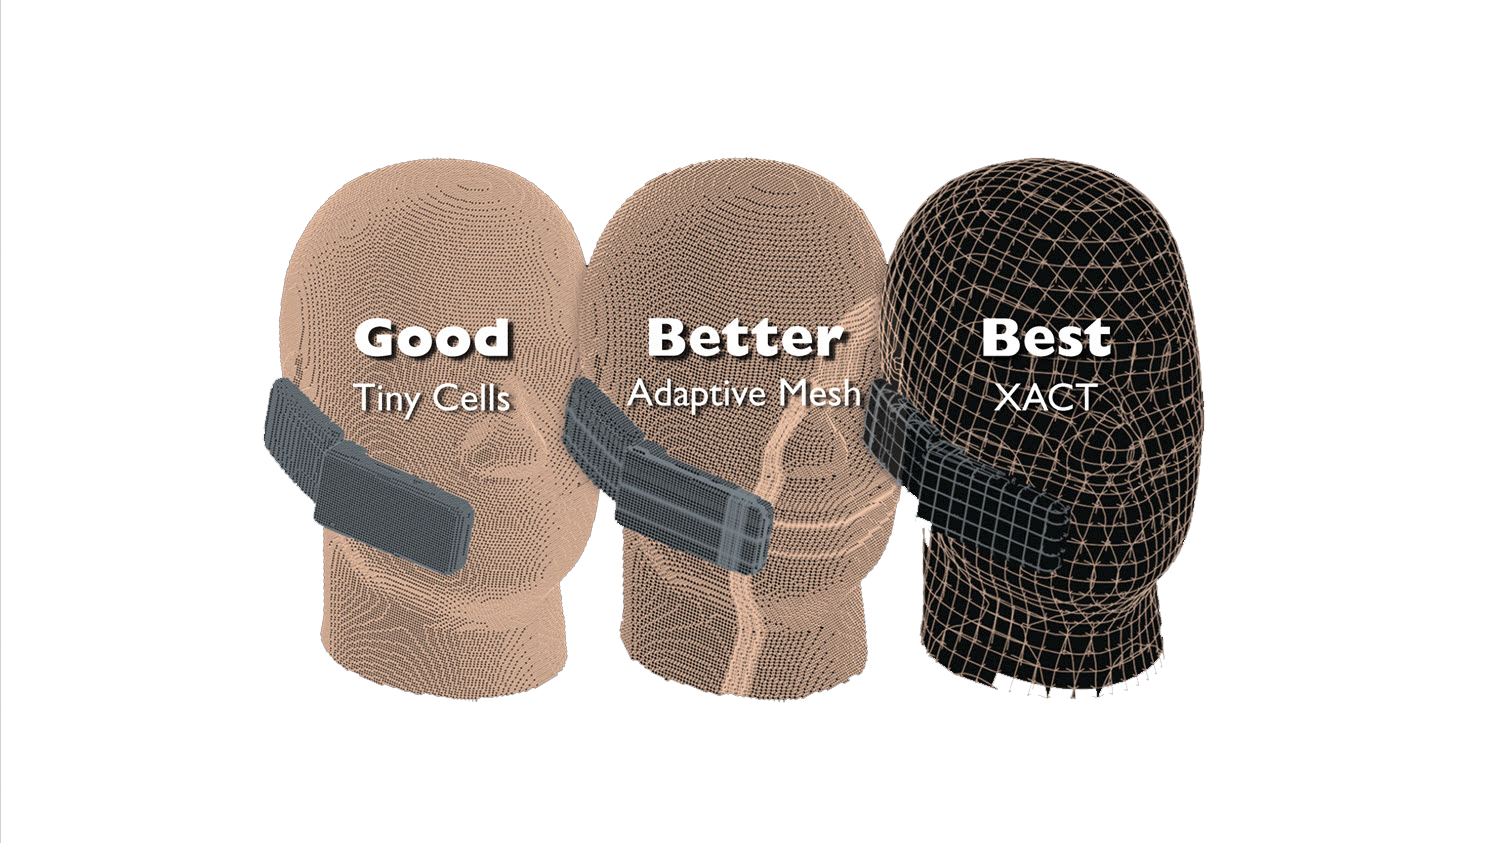 XACT-Accurate-Cell-Technology